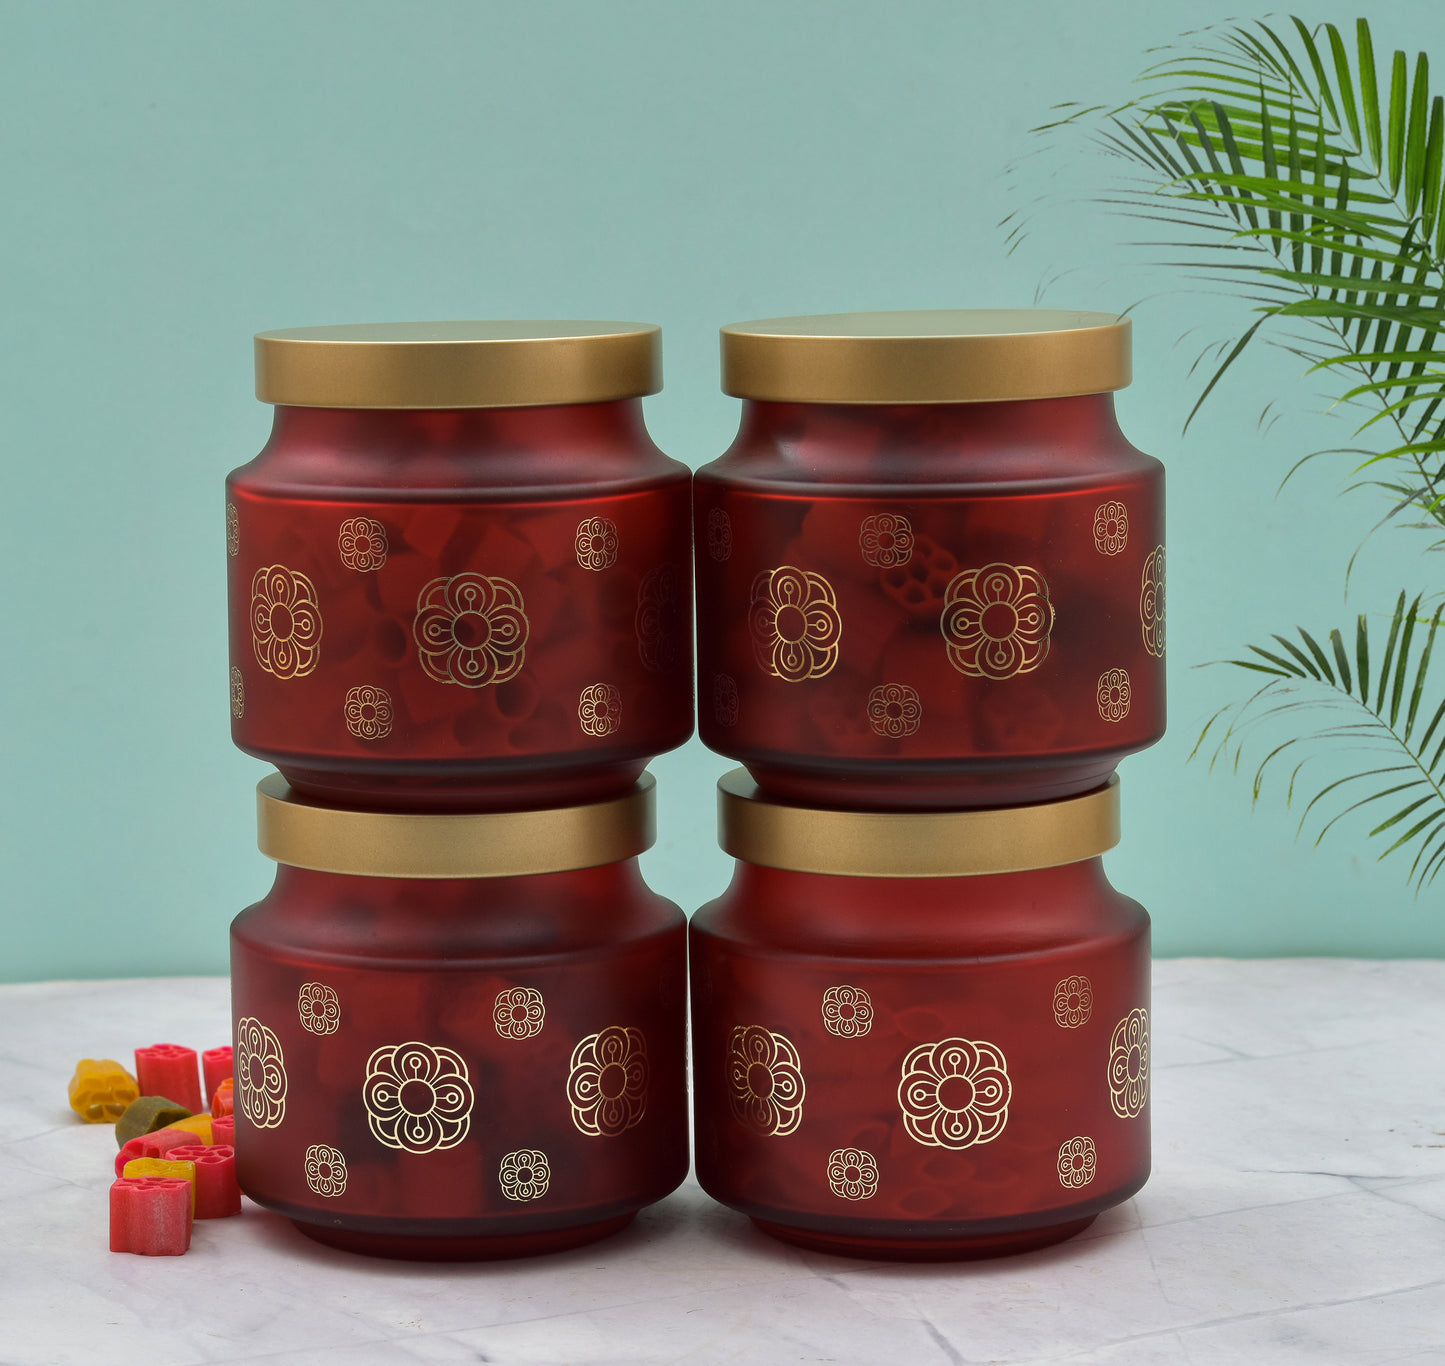 MACHAK Printed Round Glass Storage Jars with Golden Lids Food Storage Jars Canisters Kitchen Containers Set With Cap, Red, 600 ML (Set of 4)